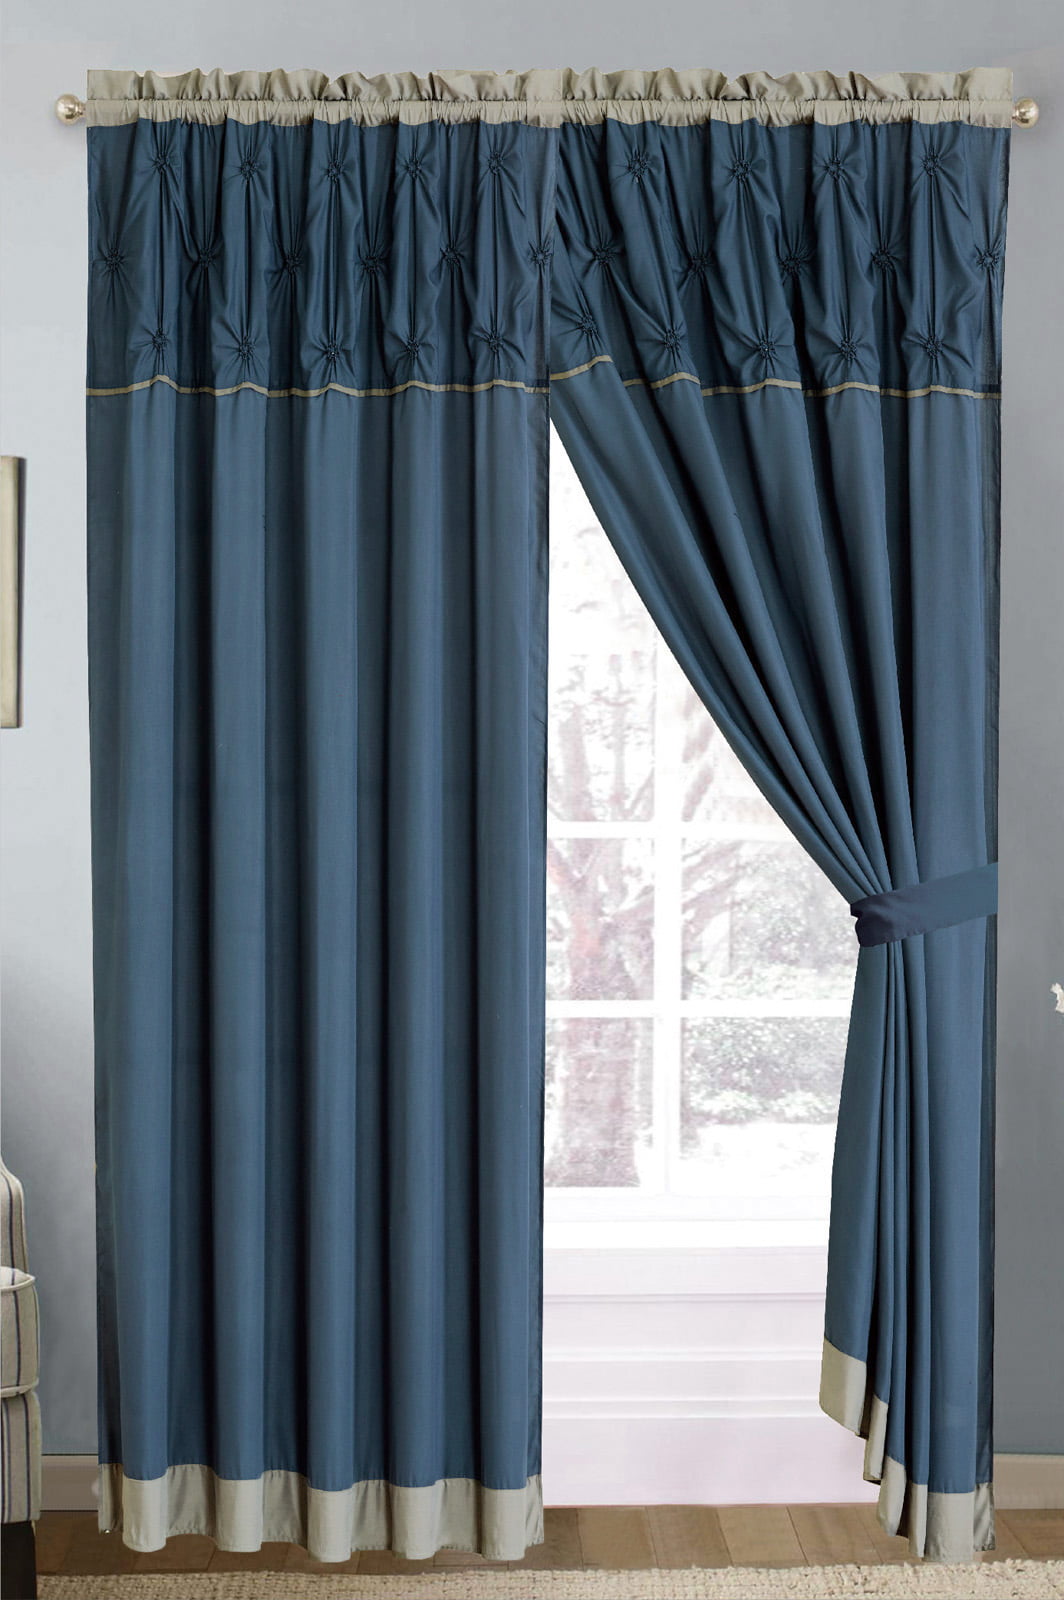 4-P Ruched Pinched Floral Diamond Curtain Set Navy Blue Gray Sheer Liner Valance 